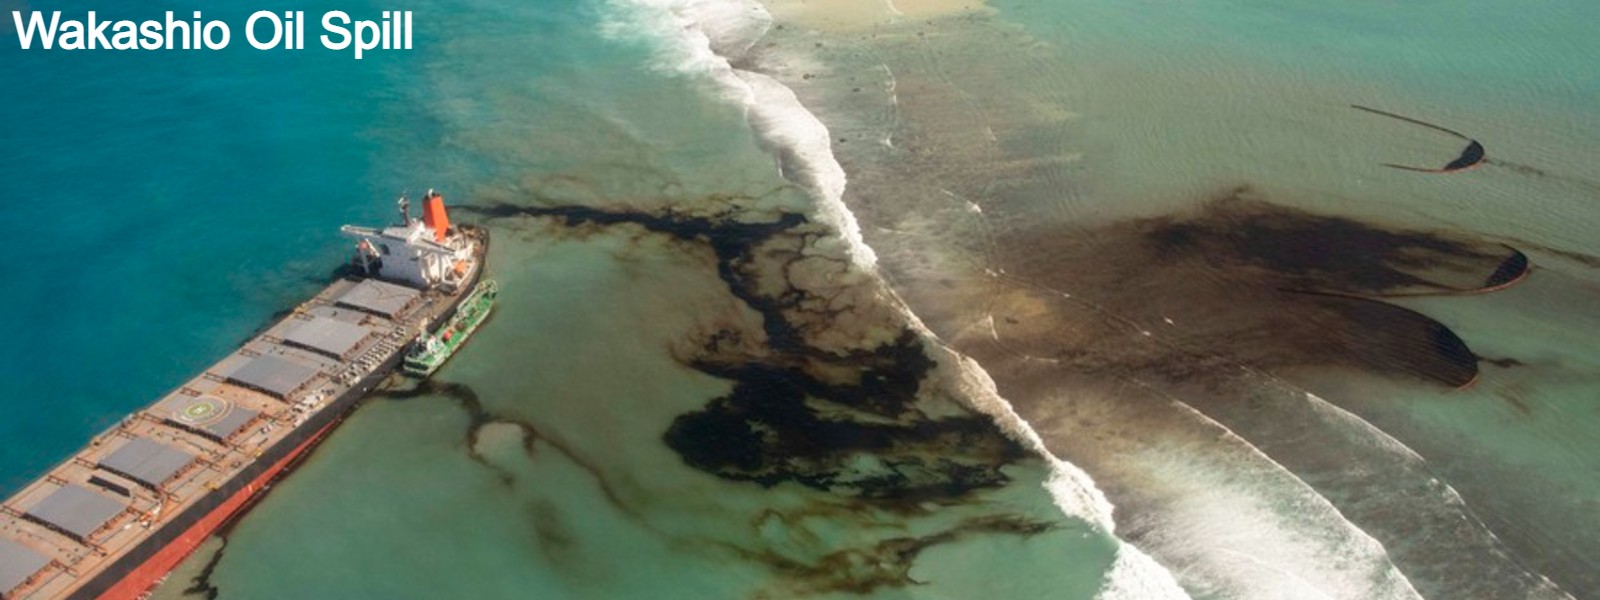 Wakashio Oil Spill: What Sri Lanka can learn before the big spill